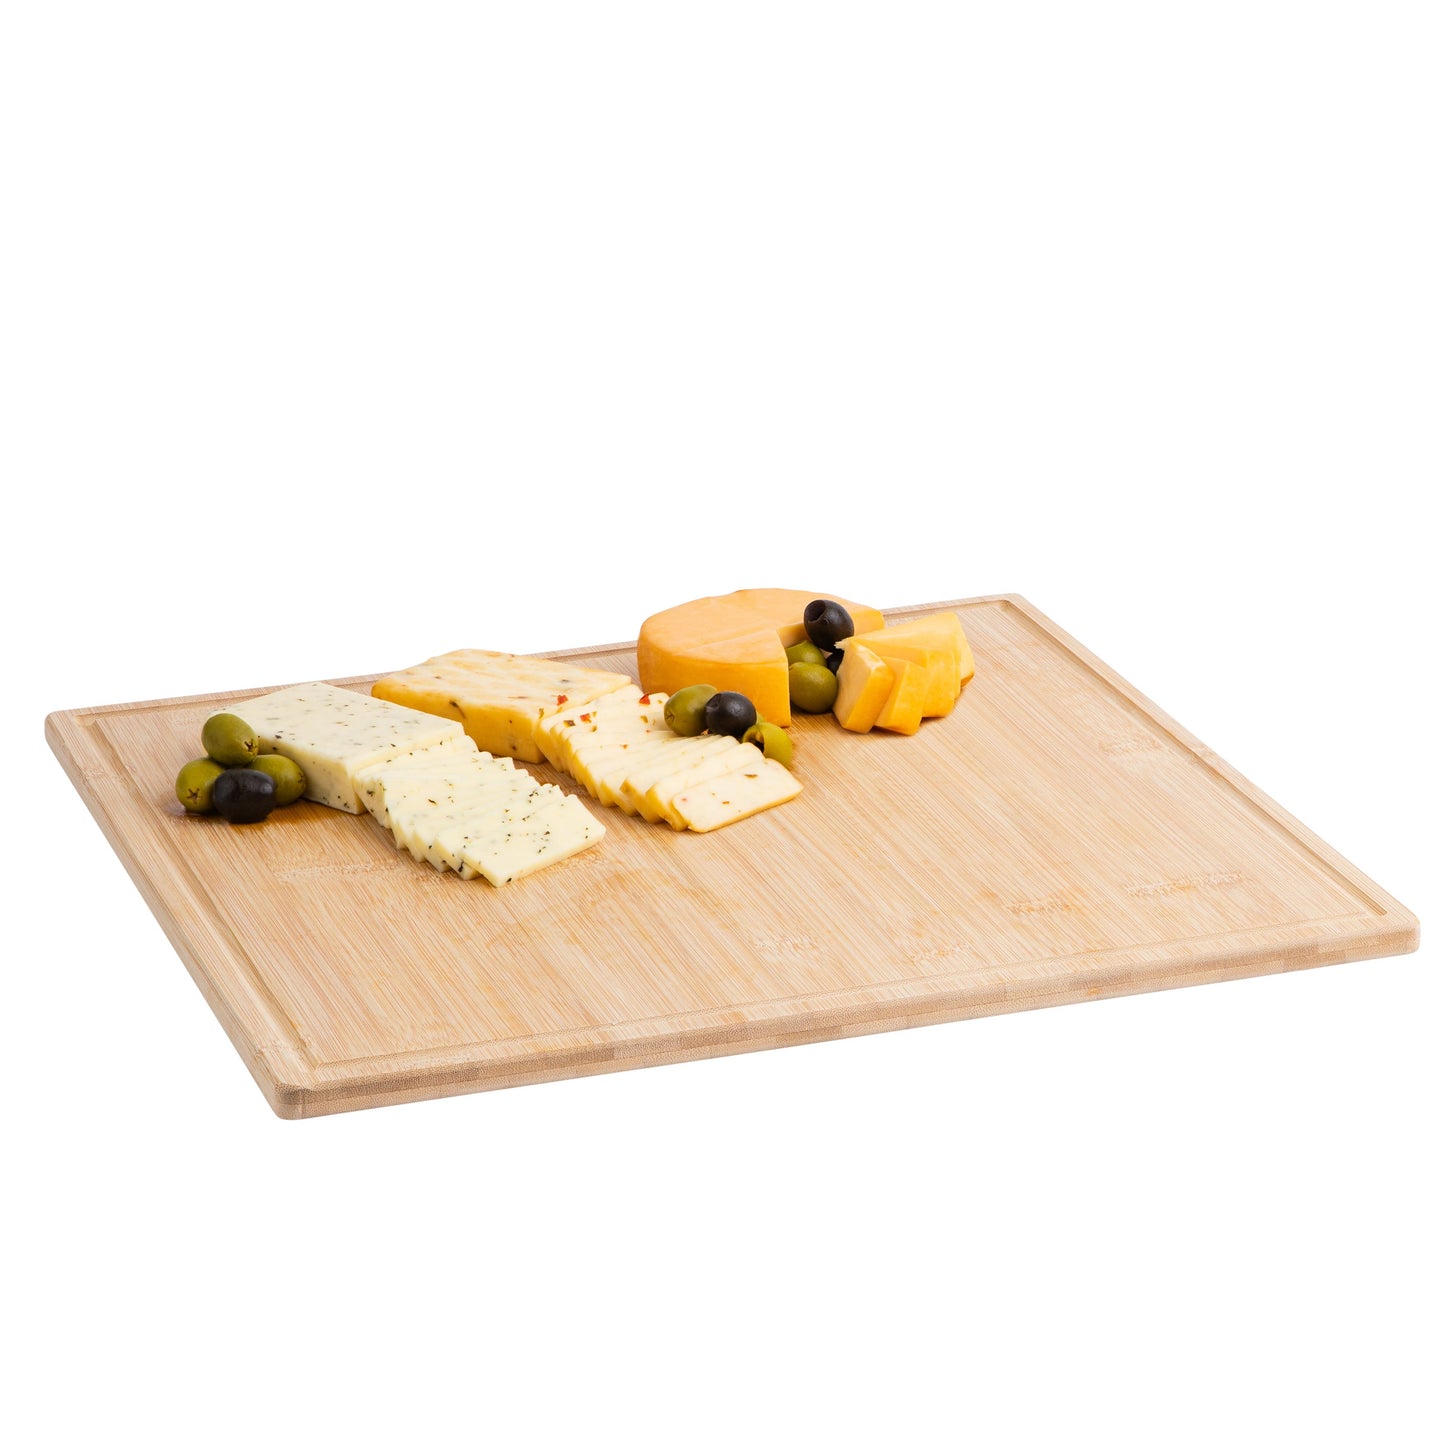 bamboo cutting board tray 16x16x0.5 inches  45.72 x 45.72 x 1.27 cm  eco friendly by hammont